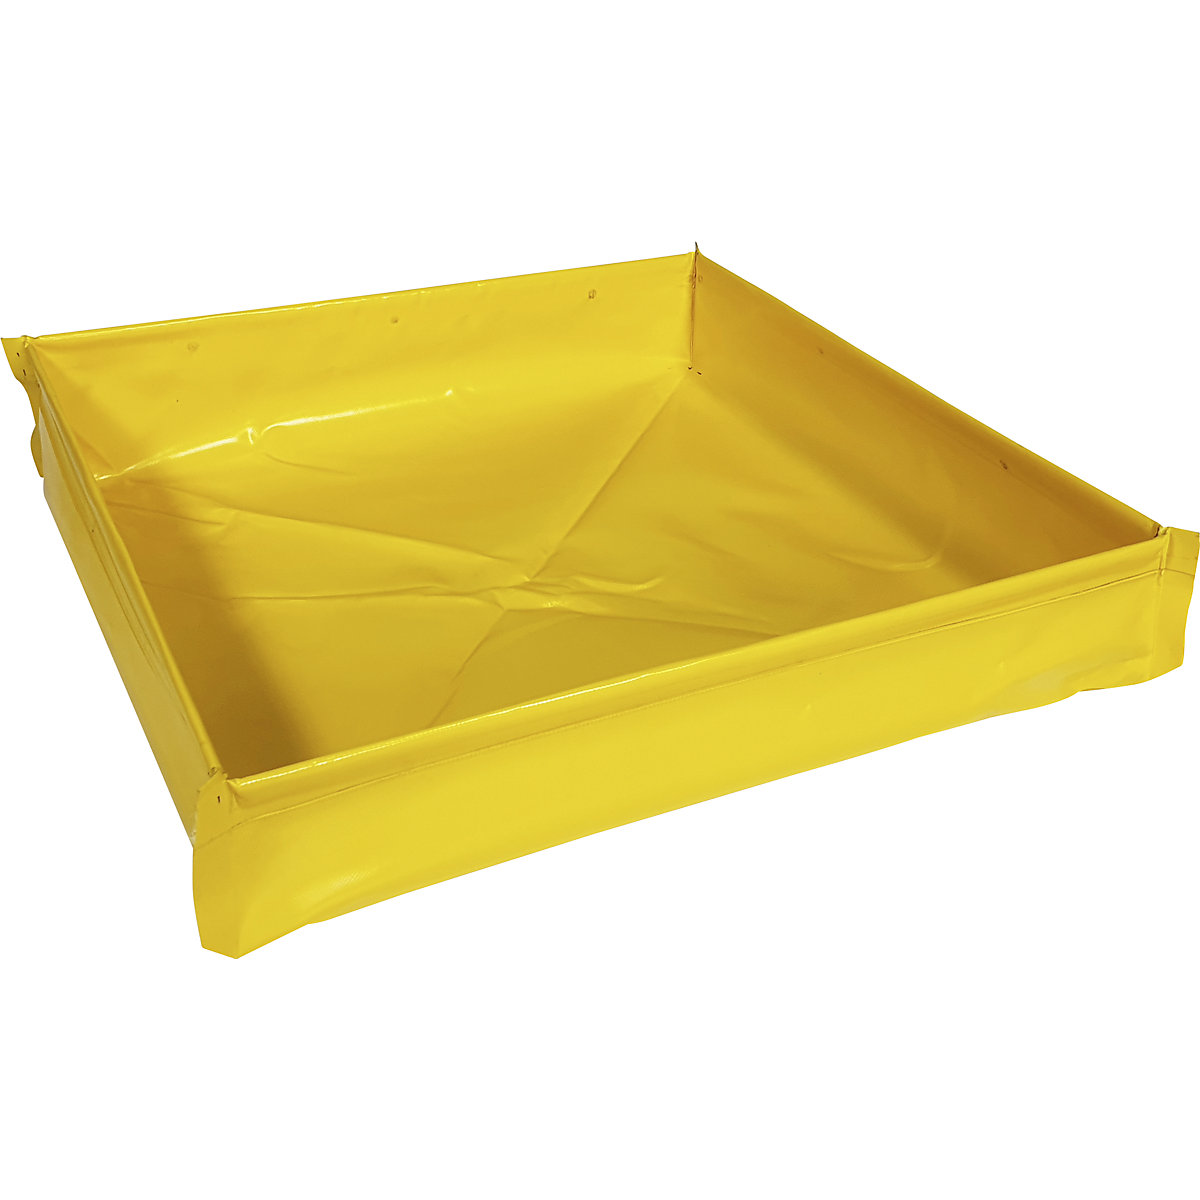 Folding tray small container – eurokraft basic, made of PVC, collection capacity 43 l-4